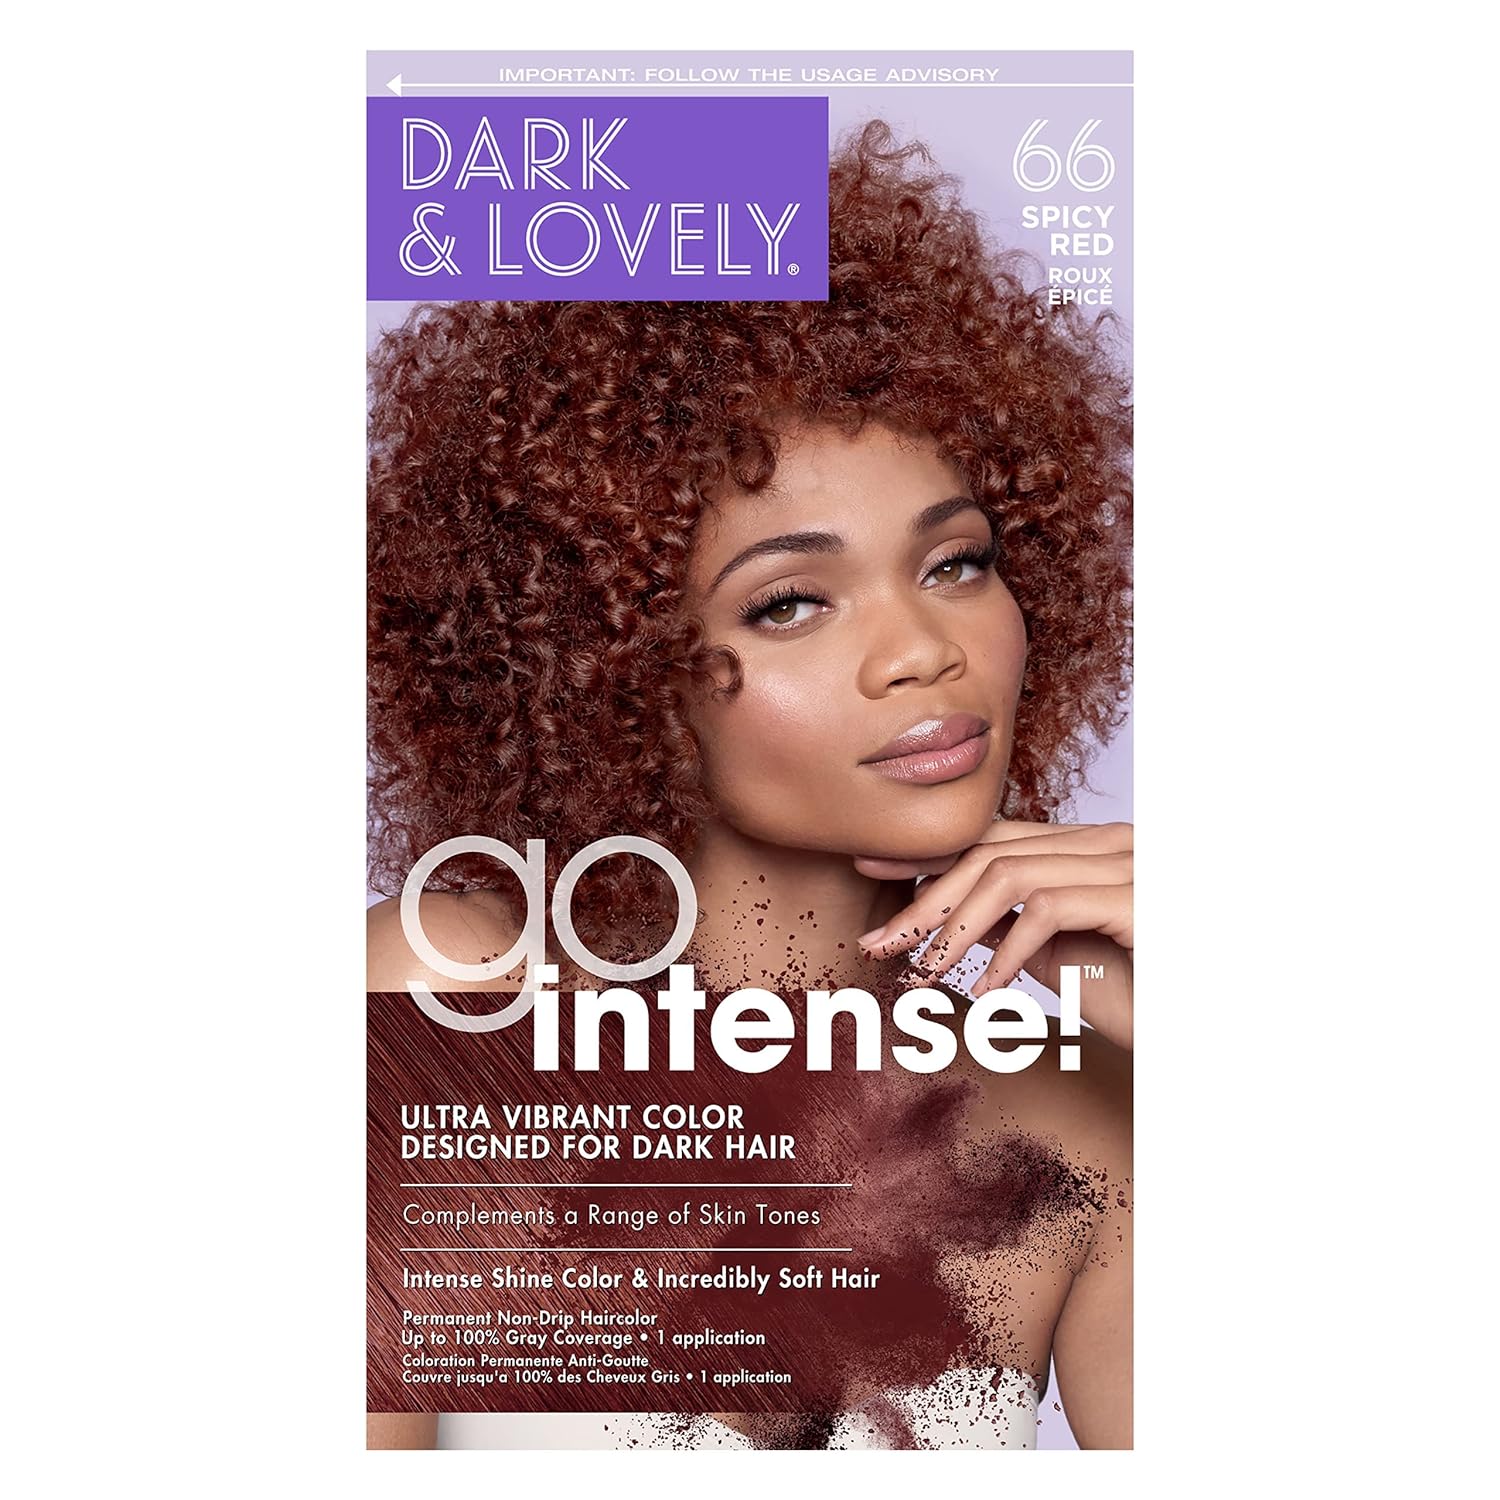 SoftSheen-Carson Dark and Lovely Ultra Vibrant Permanent Hair Color Go Intense Hair Dye for Dark Hair with Olive Oil for Shine and Softness, Spicy Red